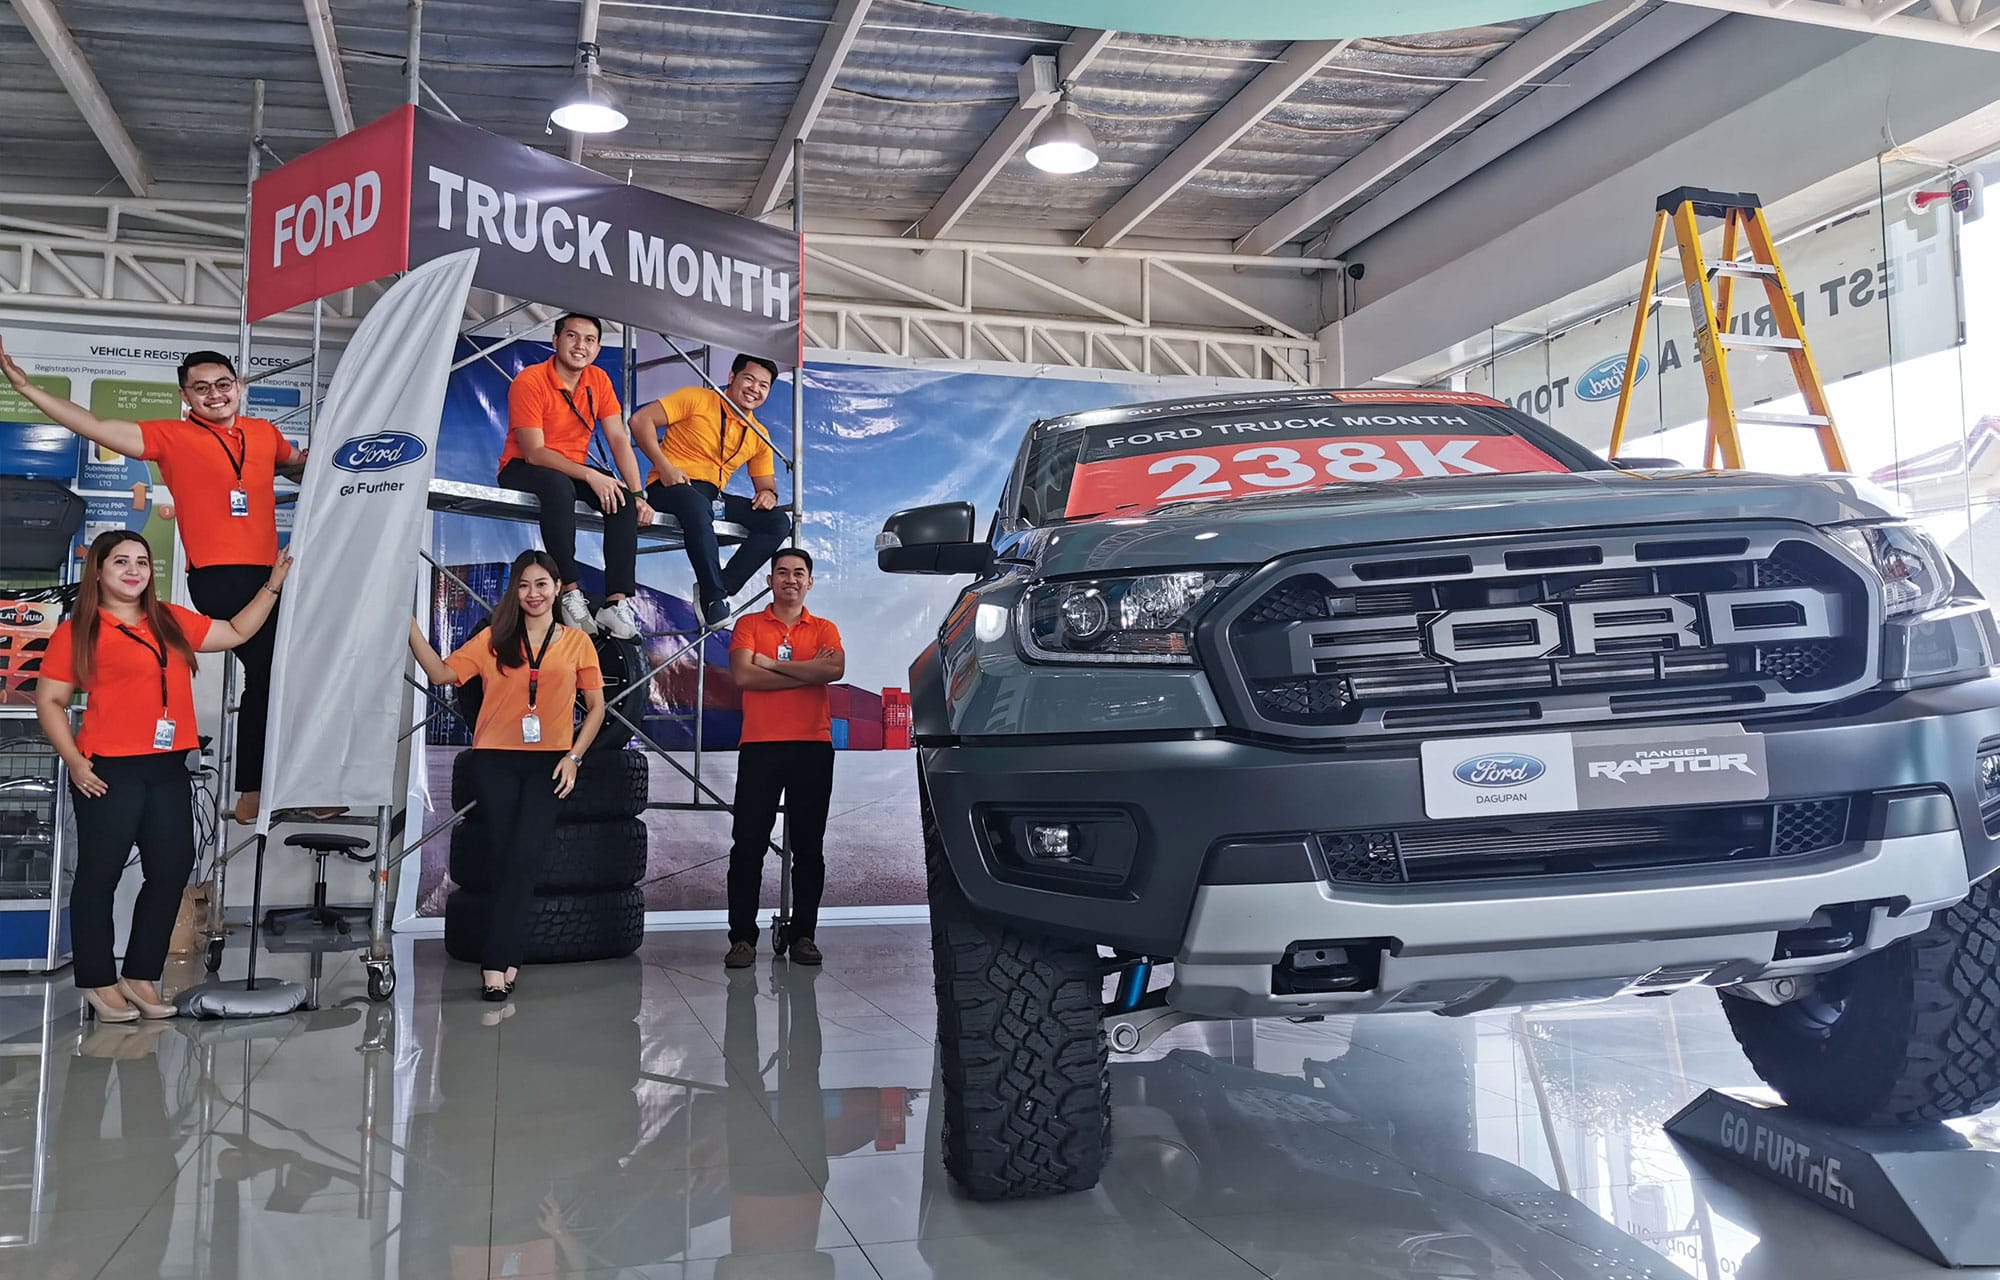 ford dagupan - pier one theme for the  ford truck month event